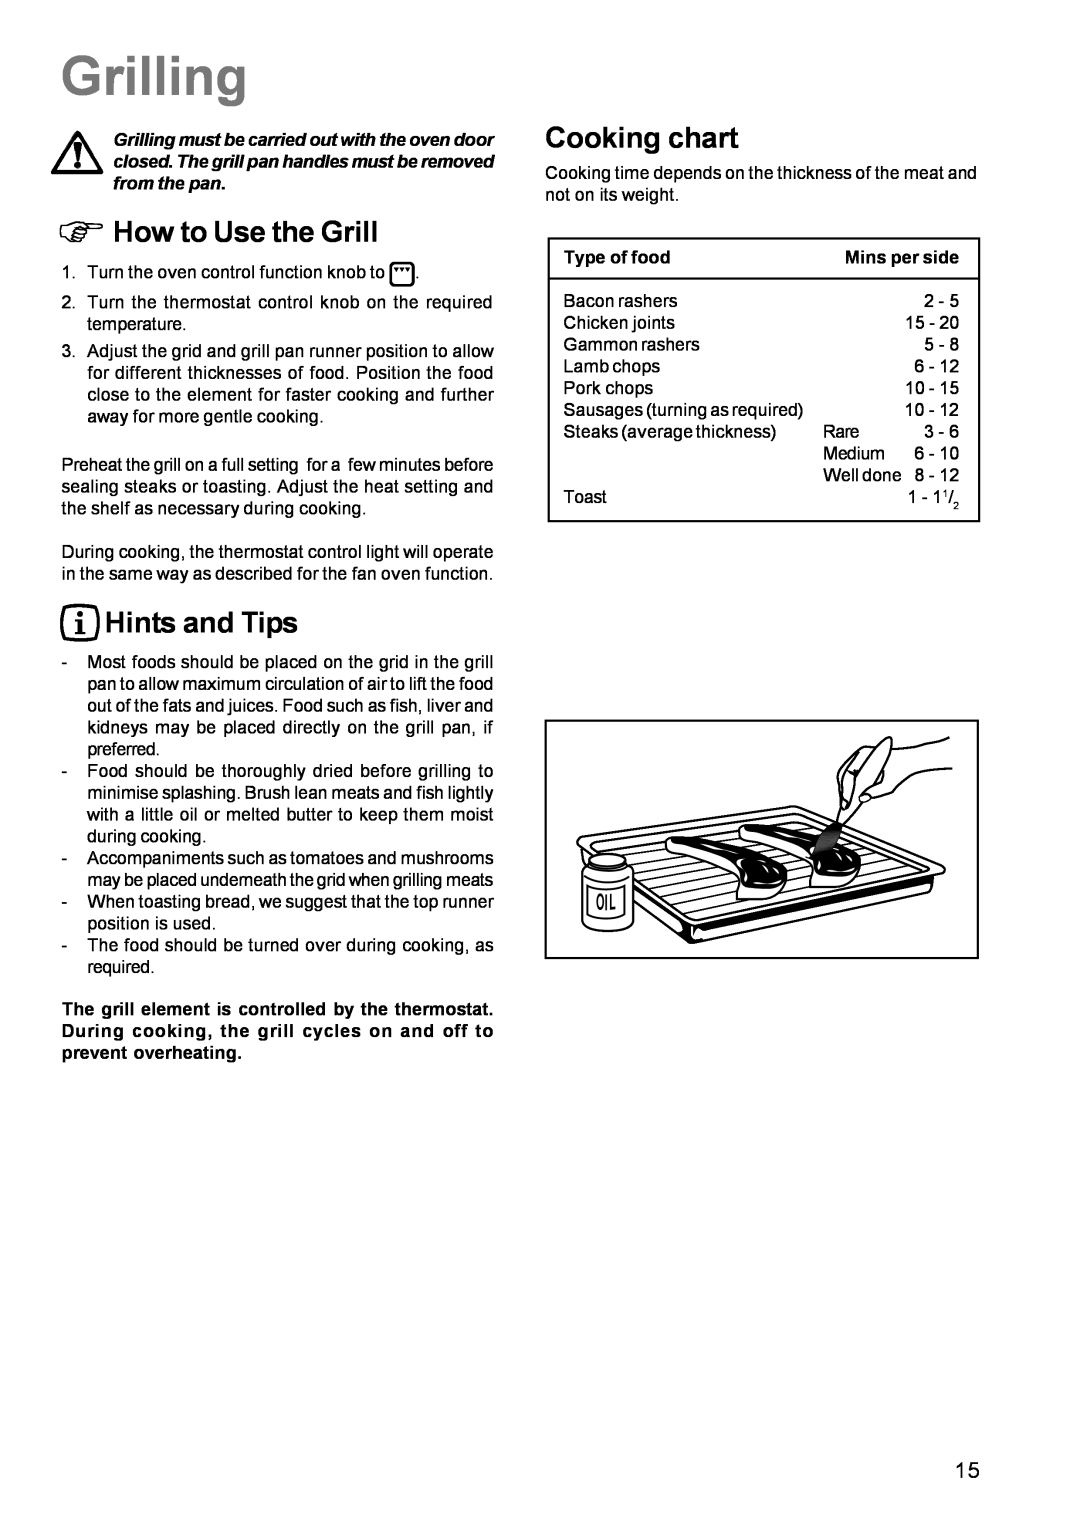 Zanussi ZCE 631 manual Grilling, Φ How to Use the Grill, Cooking chart, Hints and Tips 